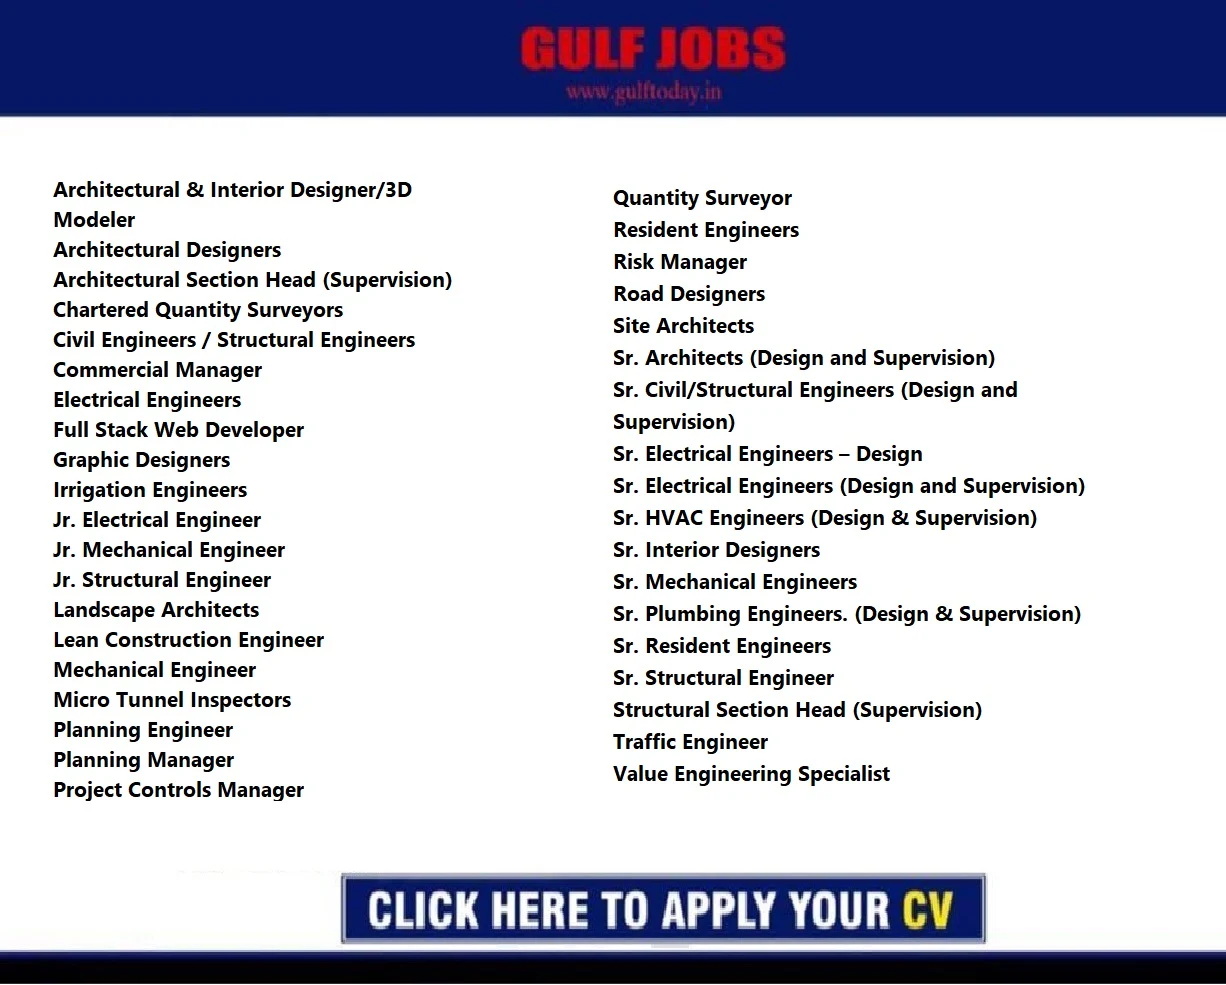 Qatar Jobs-Architectural Interior Designer-Quantity Surveyors-Structural Engineers-Civil Engineers-Commercial Manager-Electrical Engineers-Graphic Designers-Project Controls Manager-Project Managers-Quantity Surveyor-Sr. Interior Designers-Sr. Resident Engineers-